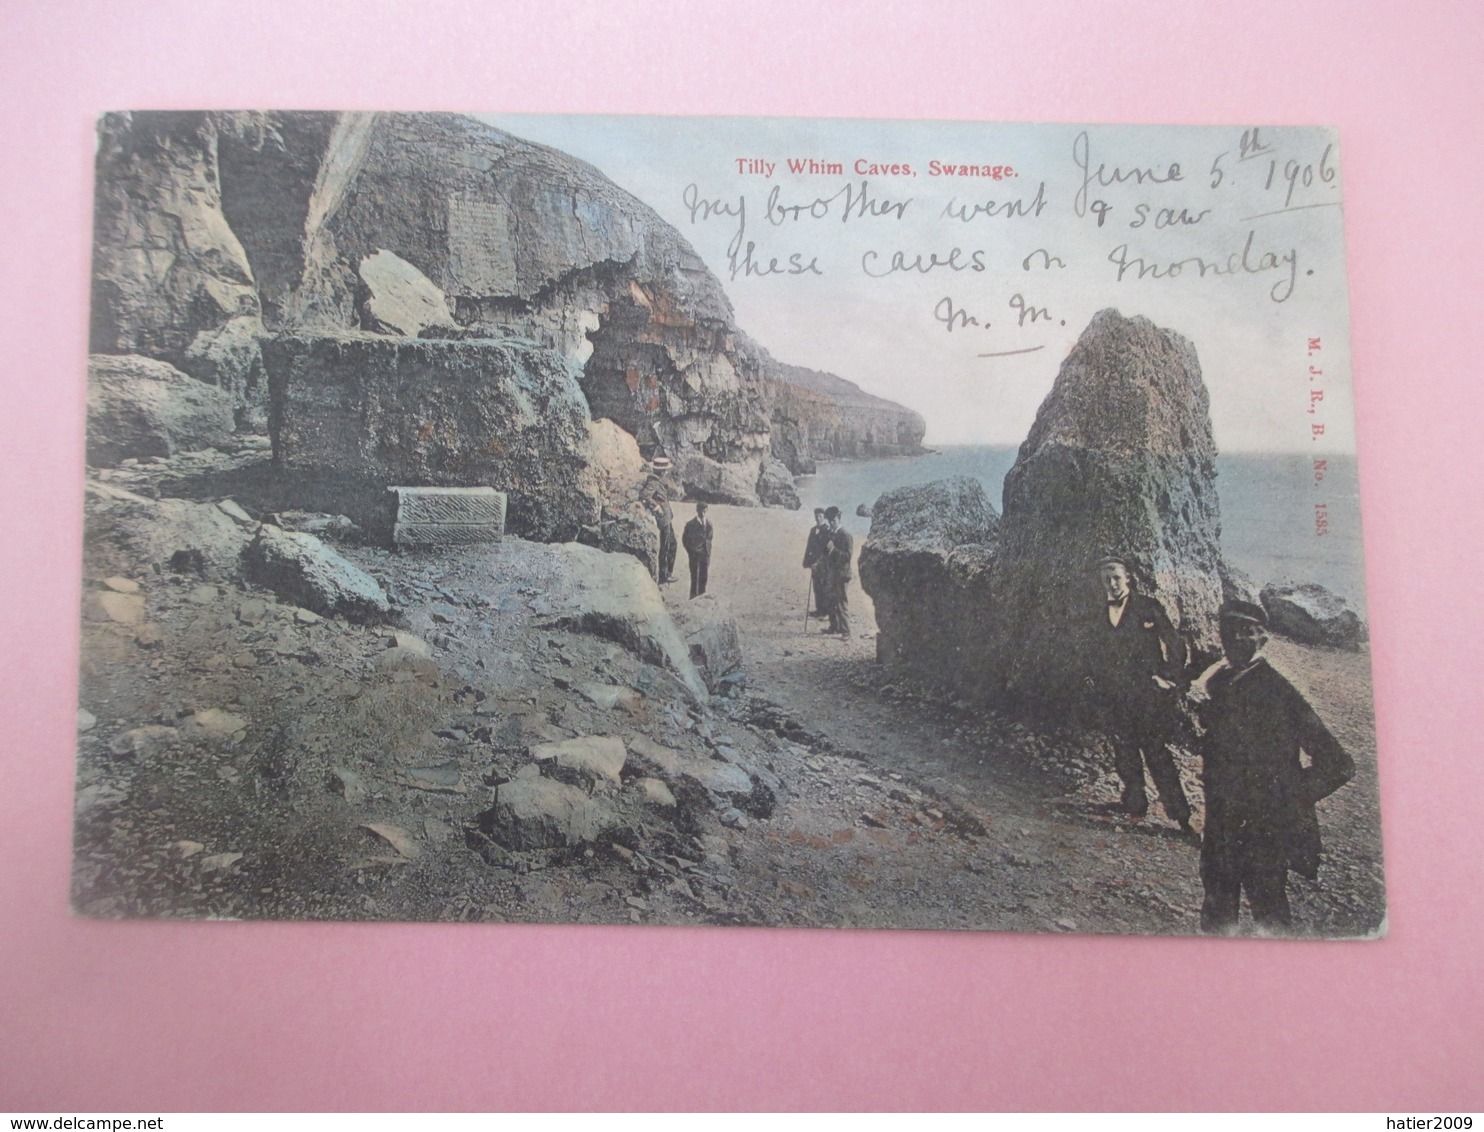 Tilly Whim Caves SWANAGE_1906' - Swanage